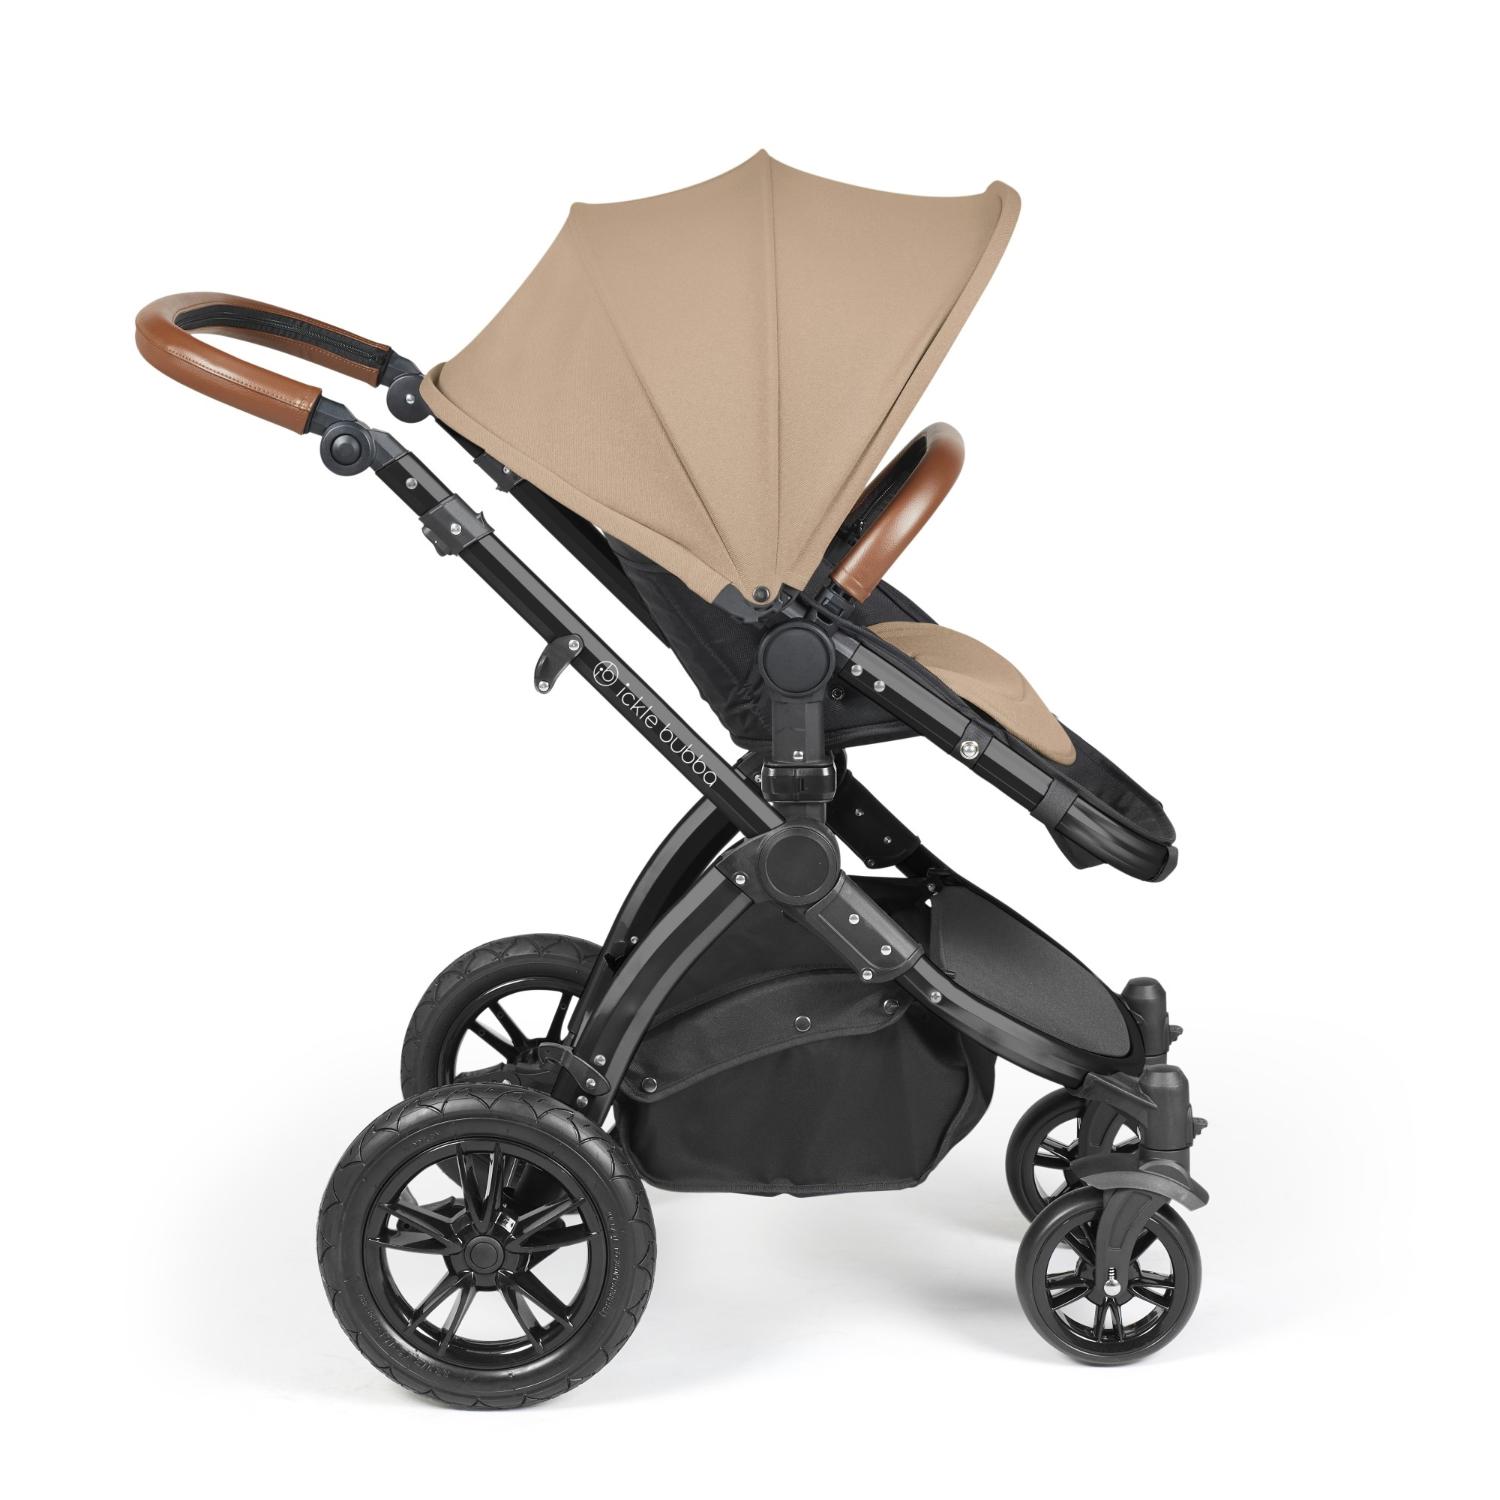 Side view of Ickle Bubba Stomp Luxe Pushchair with seat unit attached in Desert beige colour with tan handle